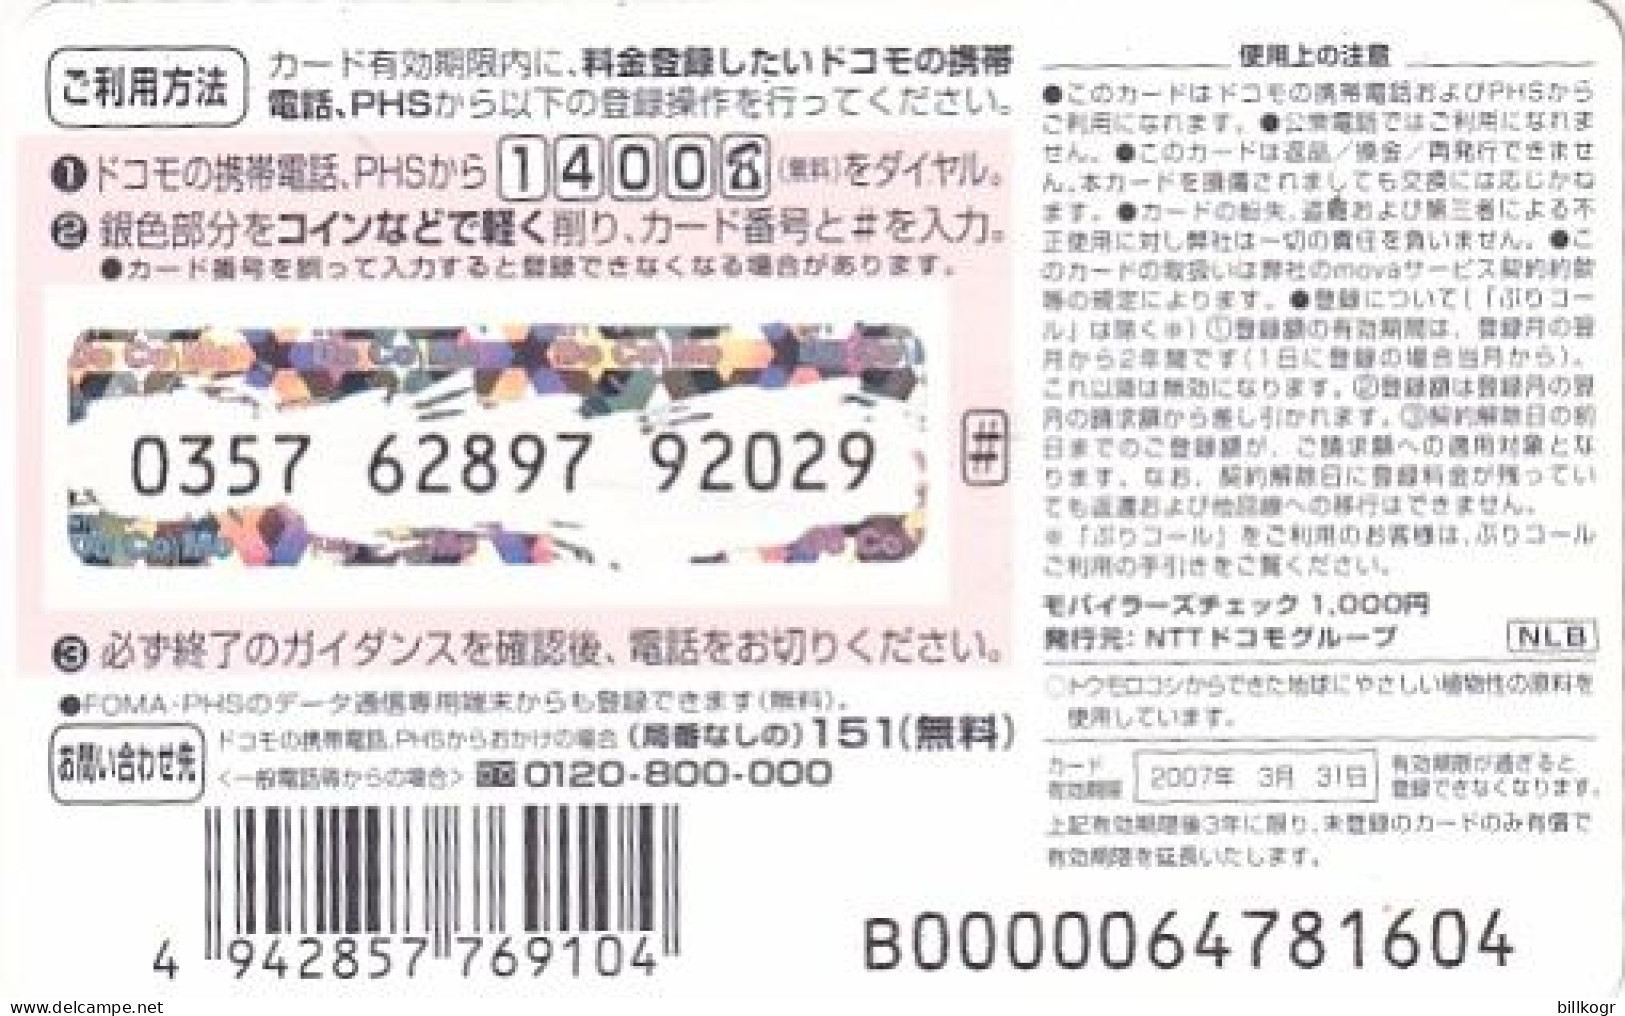 JAPAN - Dogs, Do Co Mo By NTT Prepaid Card Y1000, Exp.date 31/03/07, Used - Perros